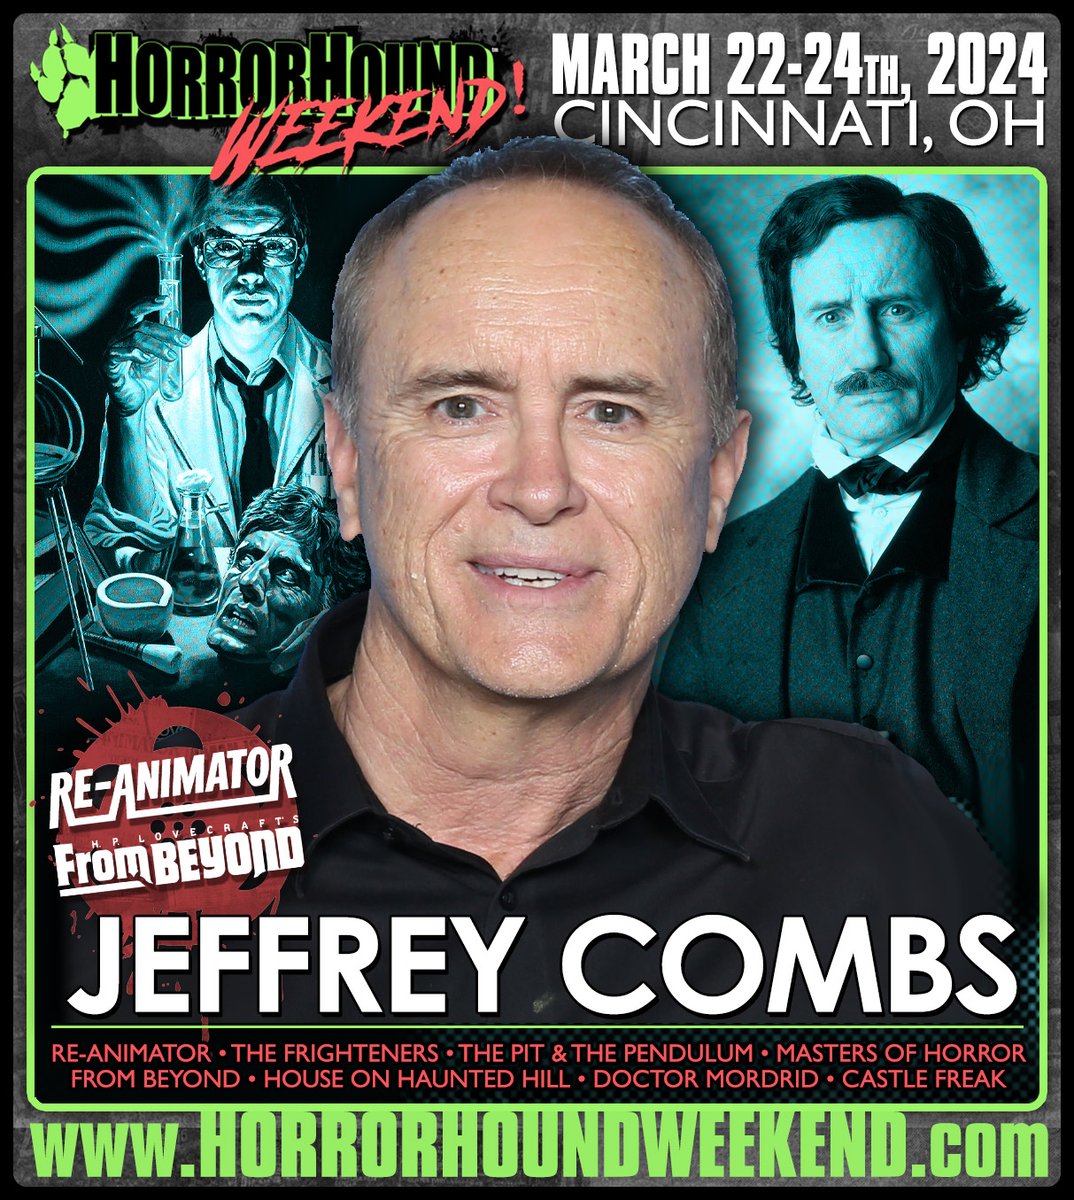 MONDAY! We are excited to launch the website – and guest reveals – for HorrorHound Weekend: Cincinnati, taking place March 22-24th at the Sharonville Convention Center. Discount Ticket pre-sale launches, along with guest reveals ALL WEEK LONG! Visit horrorhoundweekend.com